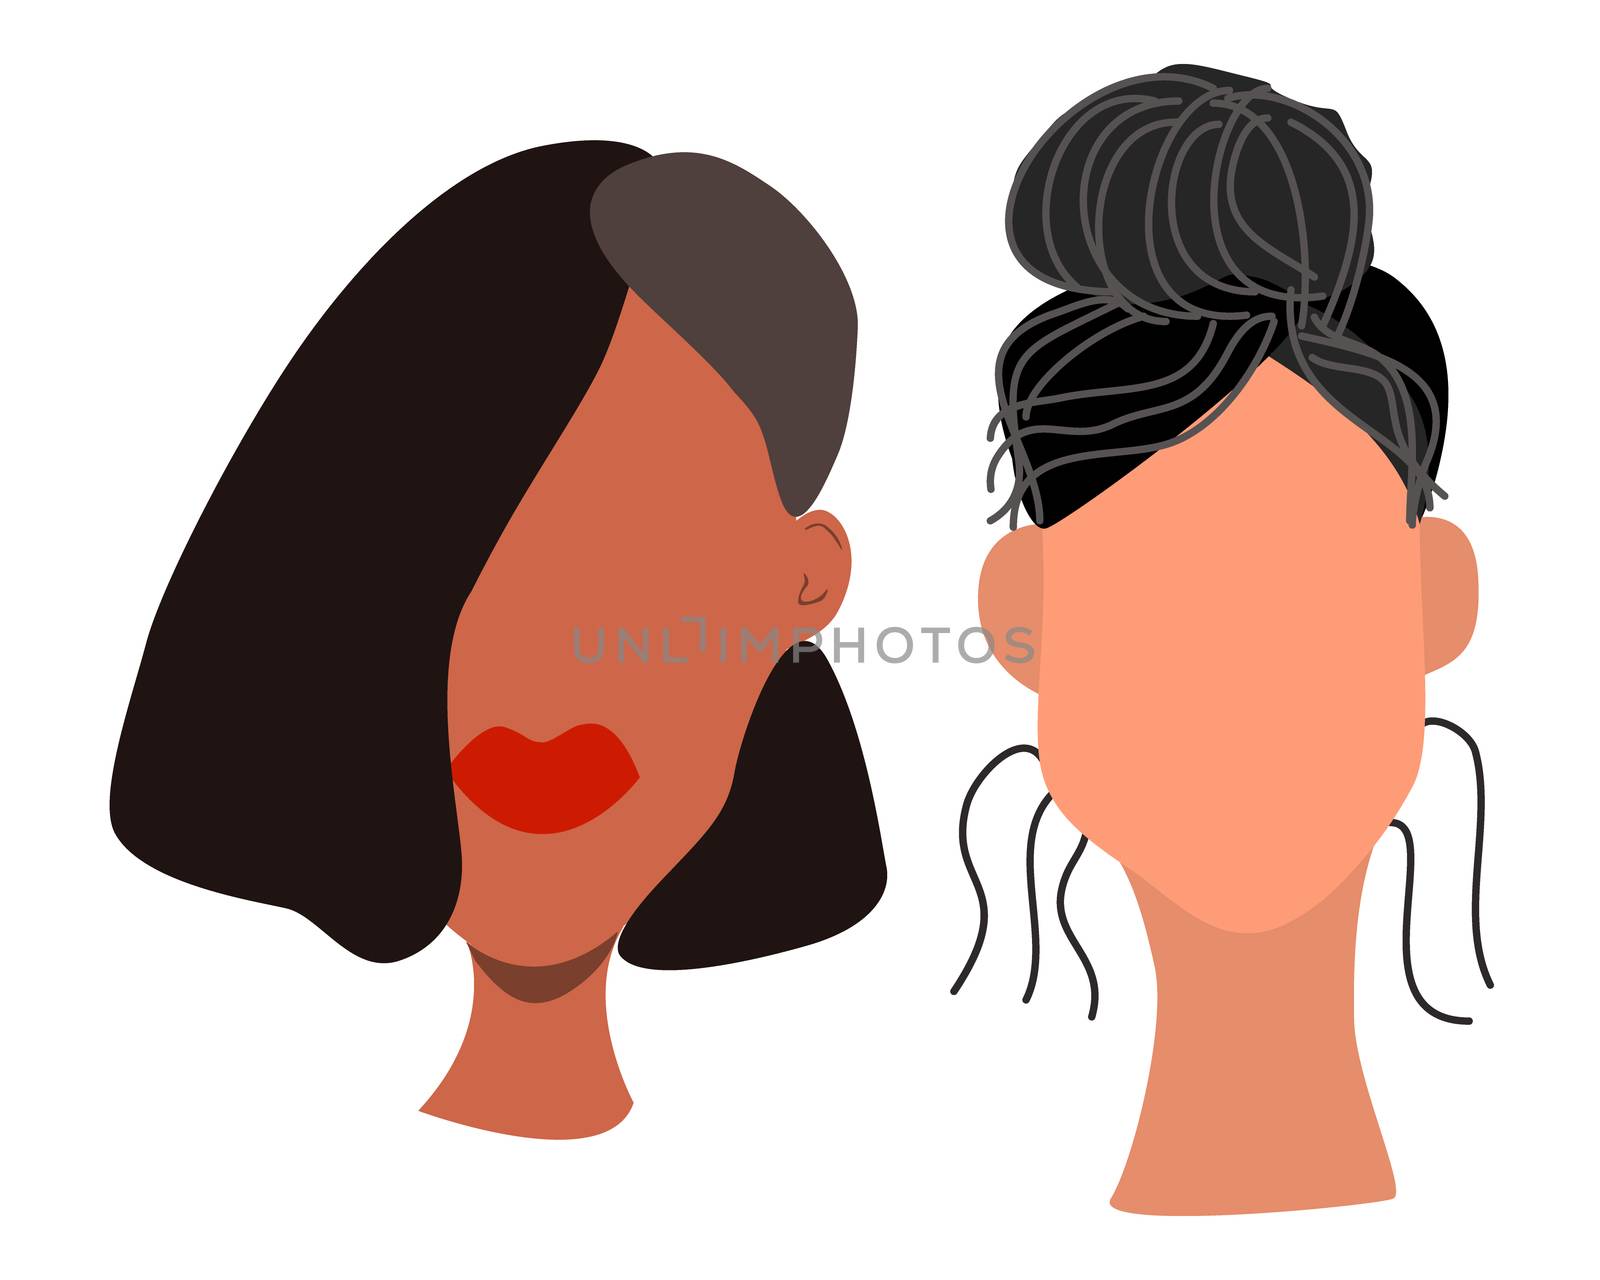 Female cartoon characters collection. Women avatars portraits set. Vector illustration isolated on white background.